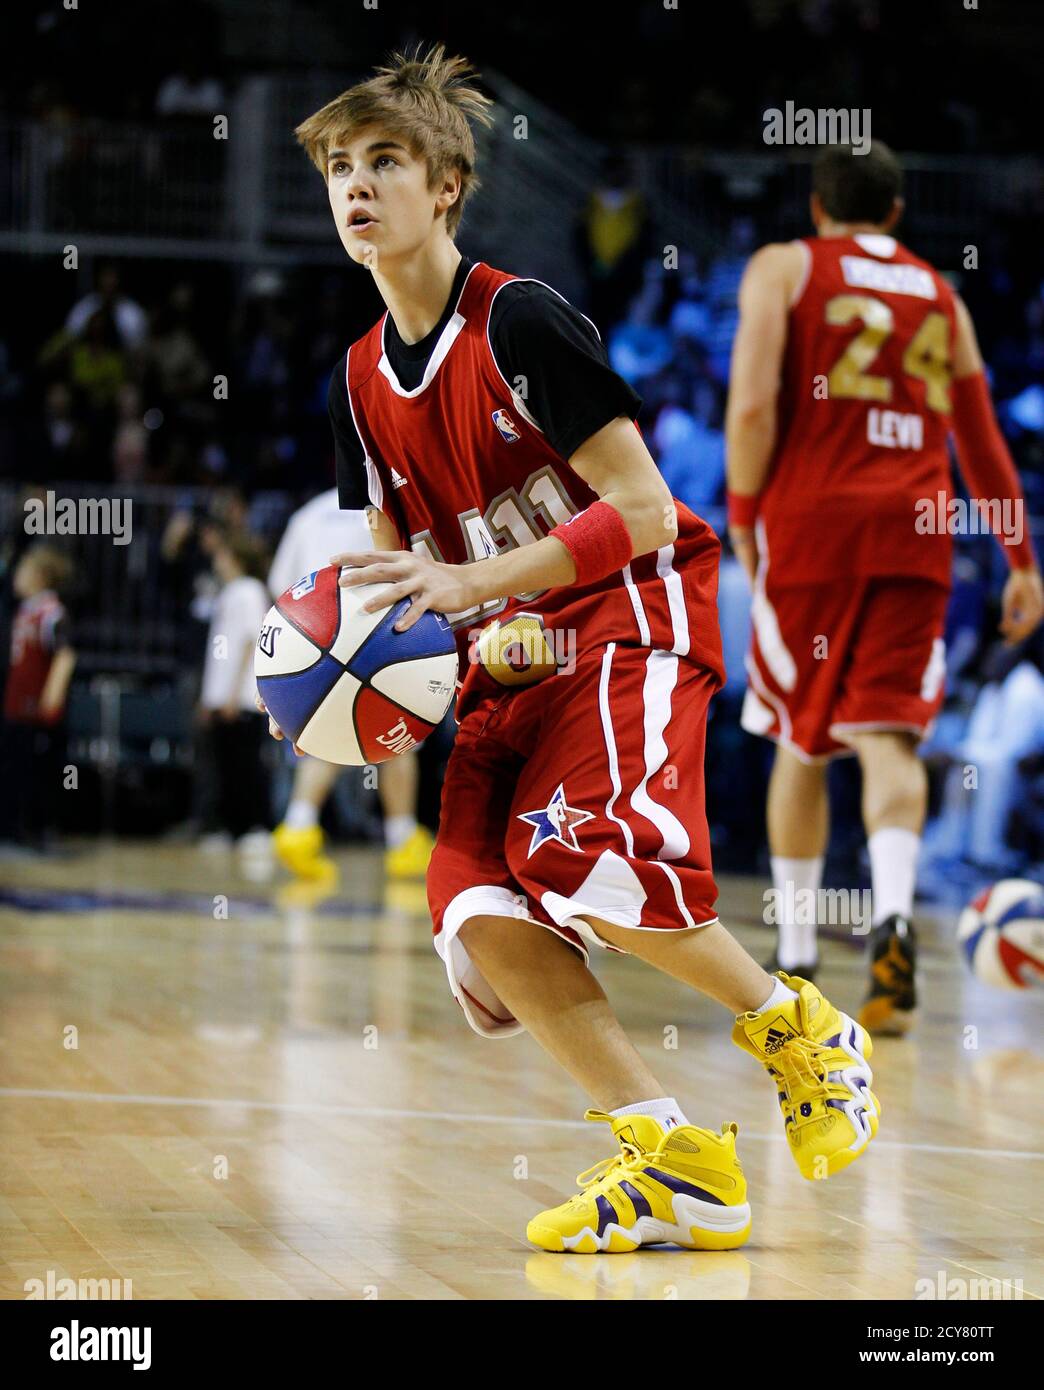 Recording artist Justin Bieber shoots the ball during a warm-up for the  2011 BBVA All-Star Celebrity basketball game as part of the NBA All-Star  basketball weekend in Los Angeles, February 18, 2011.